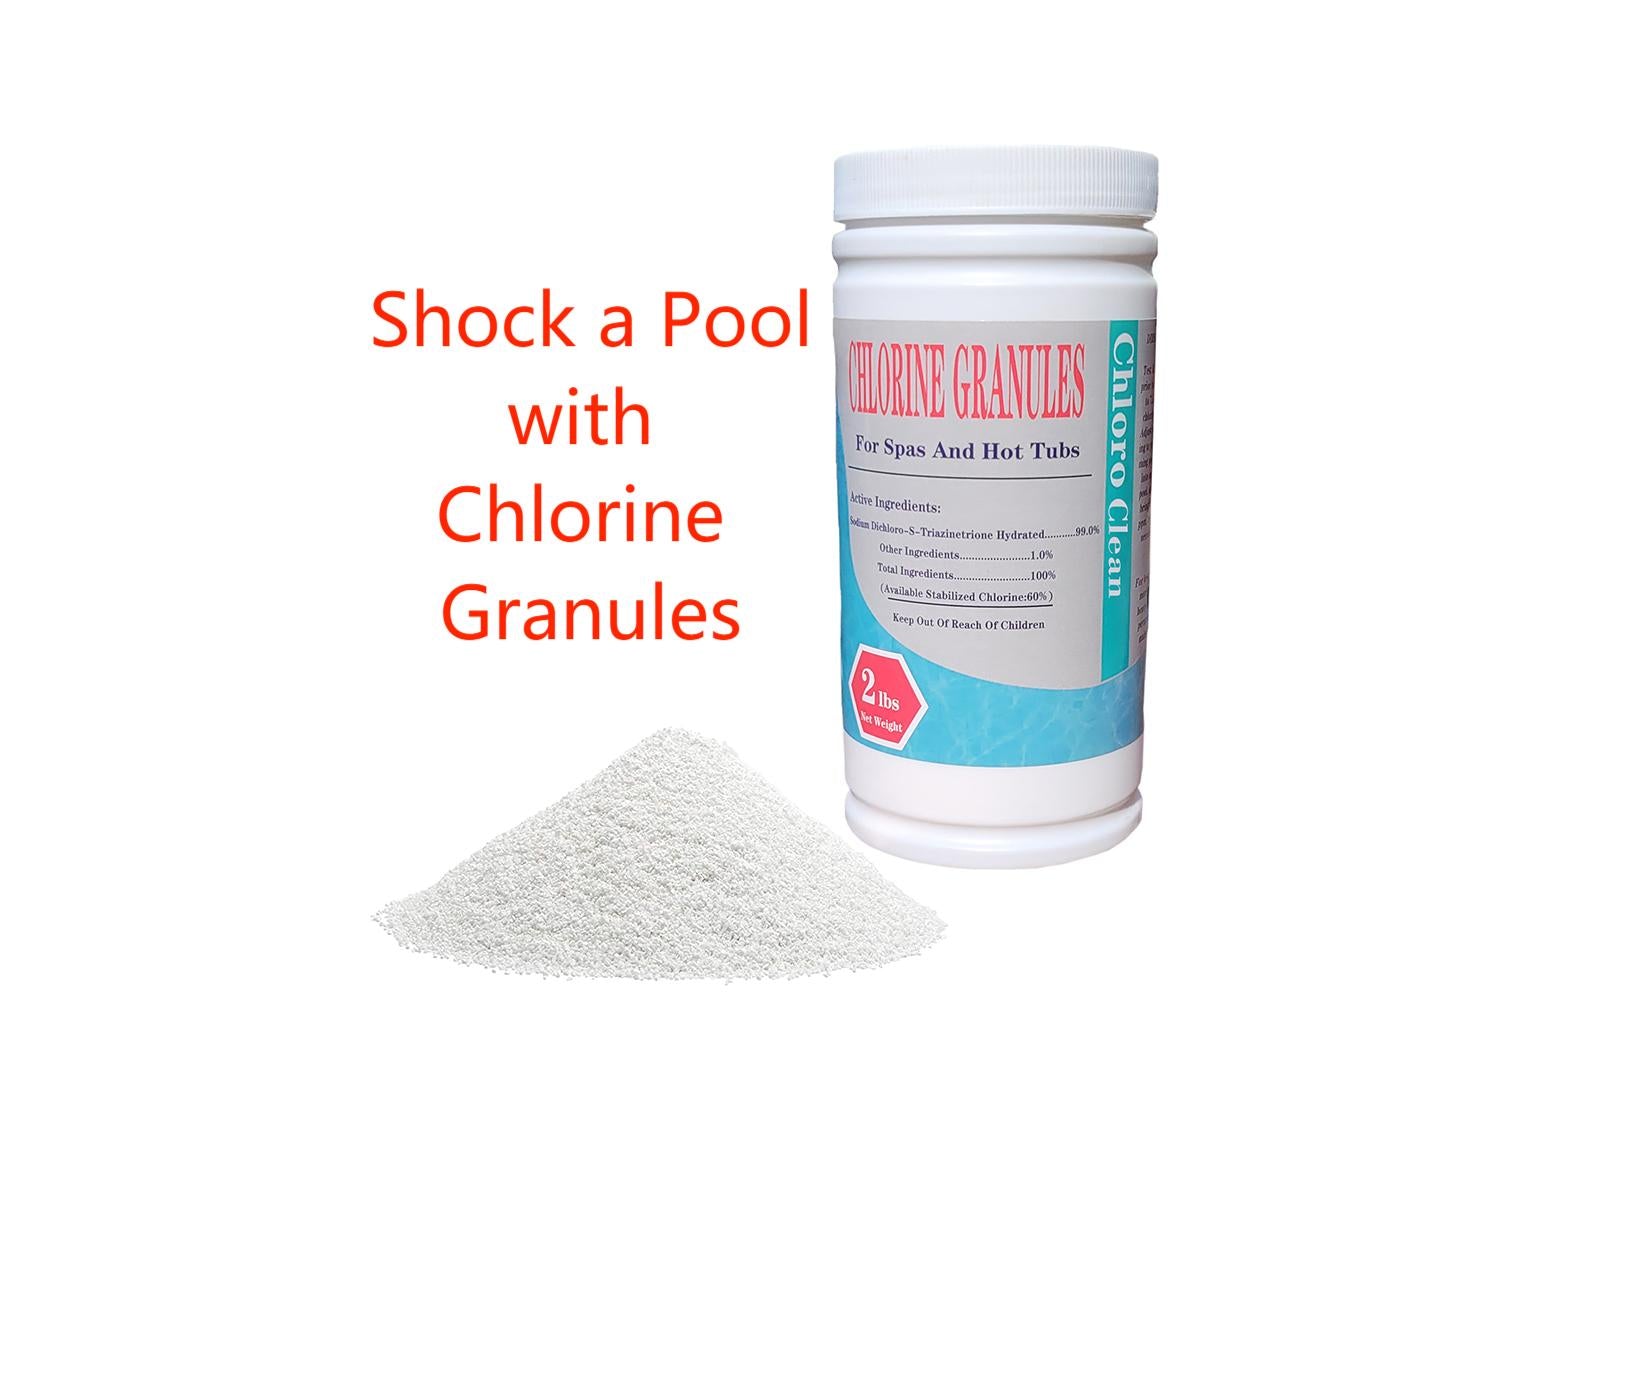 How to Shock a Pool with Chlorine Granules?